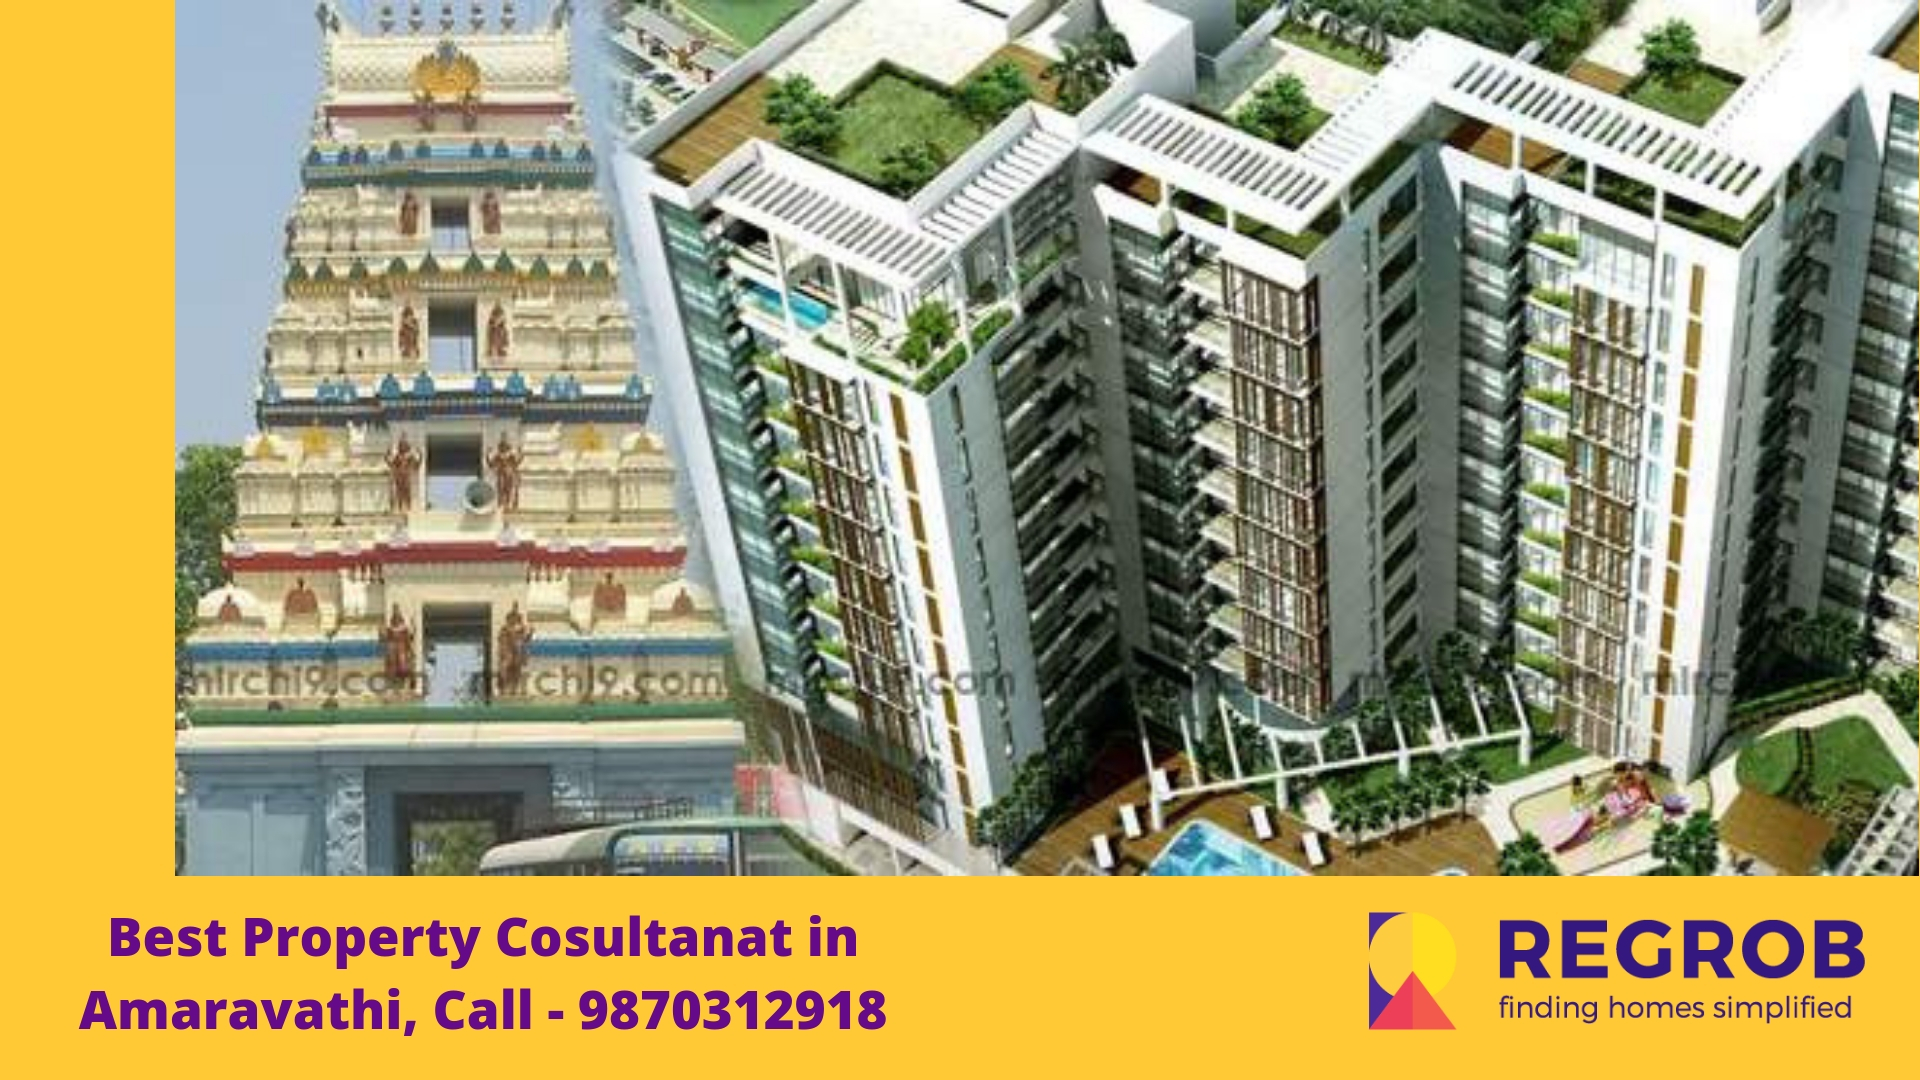 Residential And Commercial Property In Amaravathi Amaraavthi Real Estate